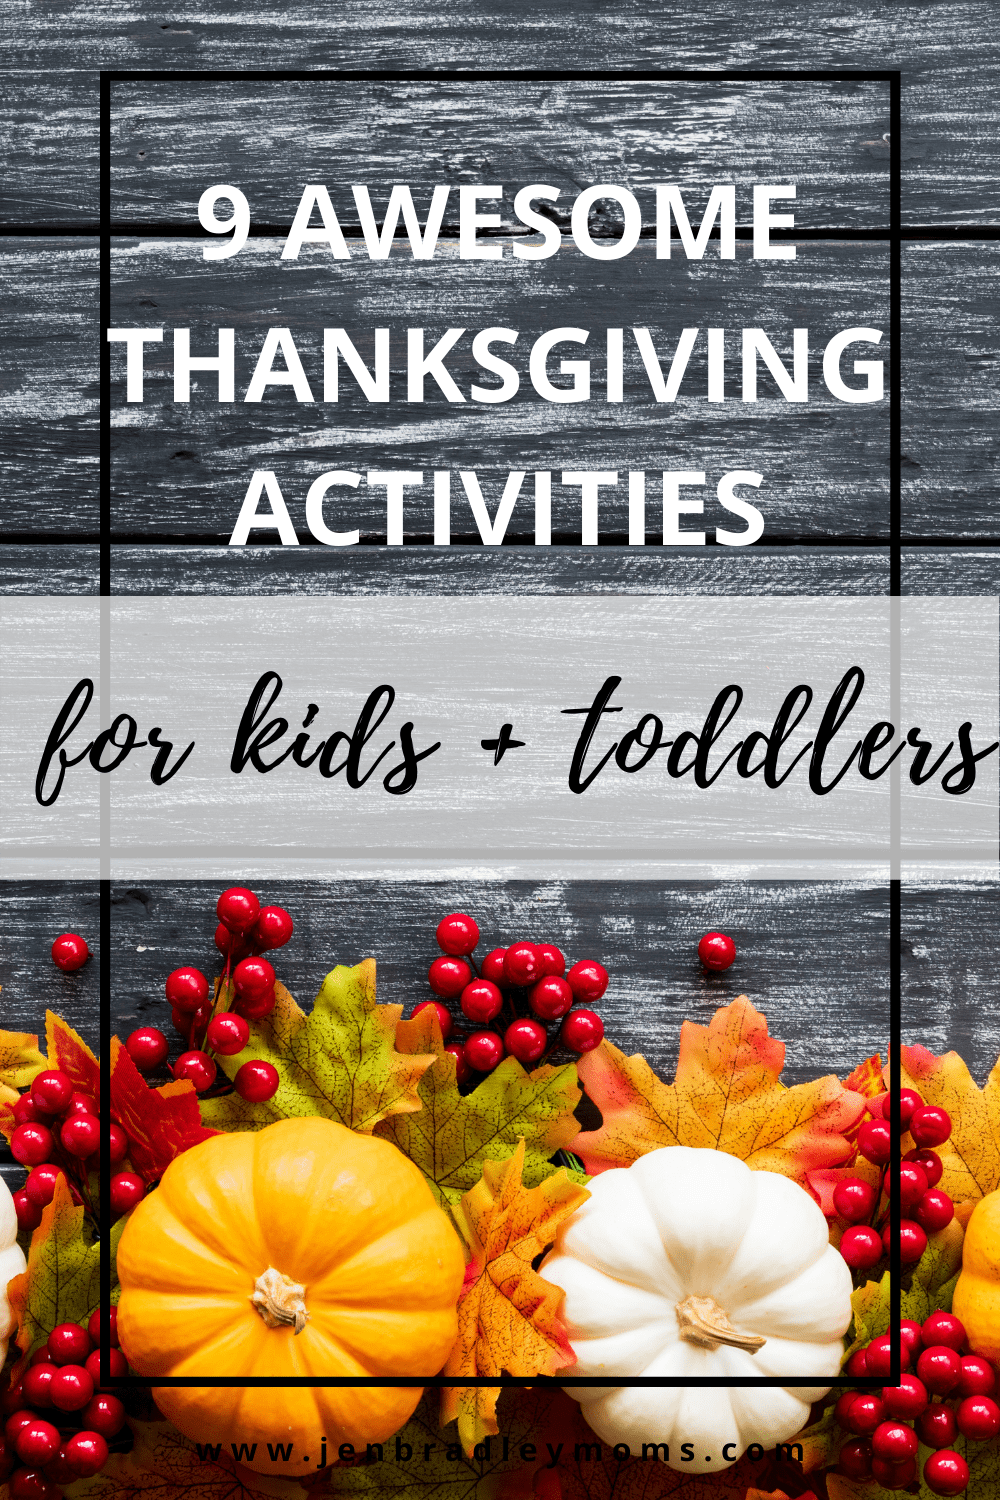 9 Awesome Thanksgiving Day Activities for Kids and Toddlers